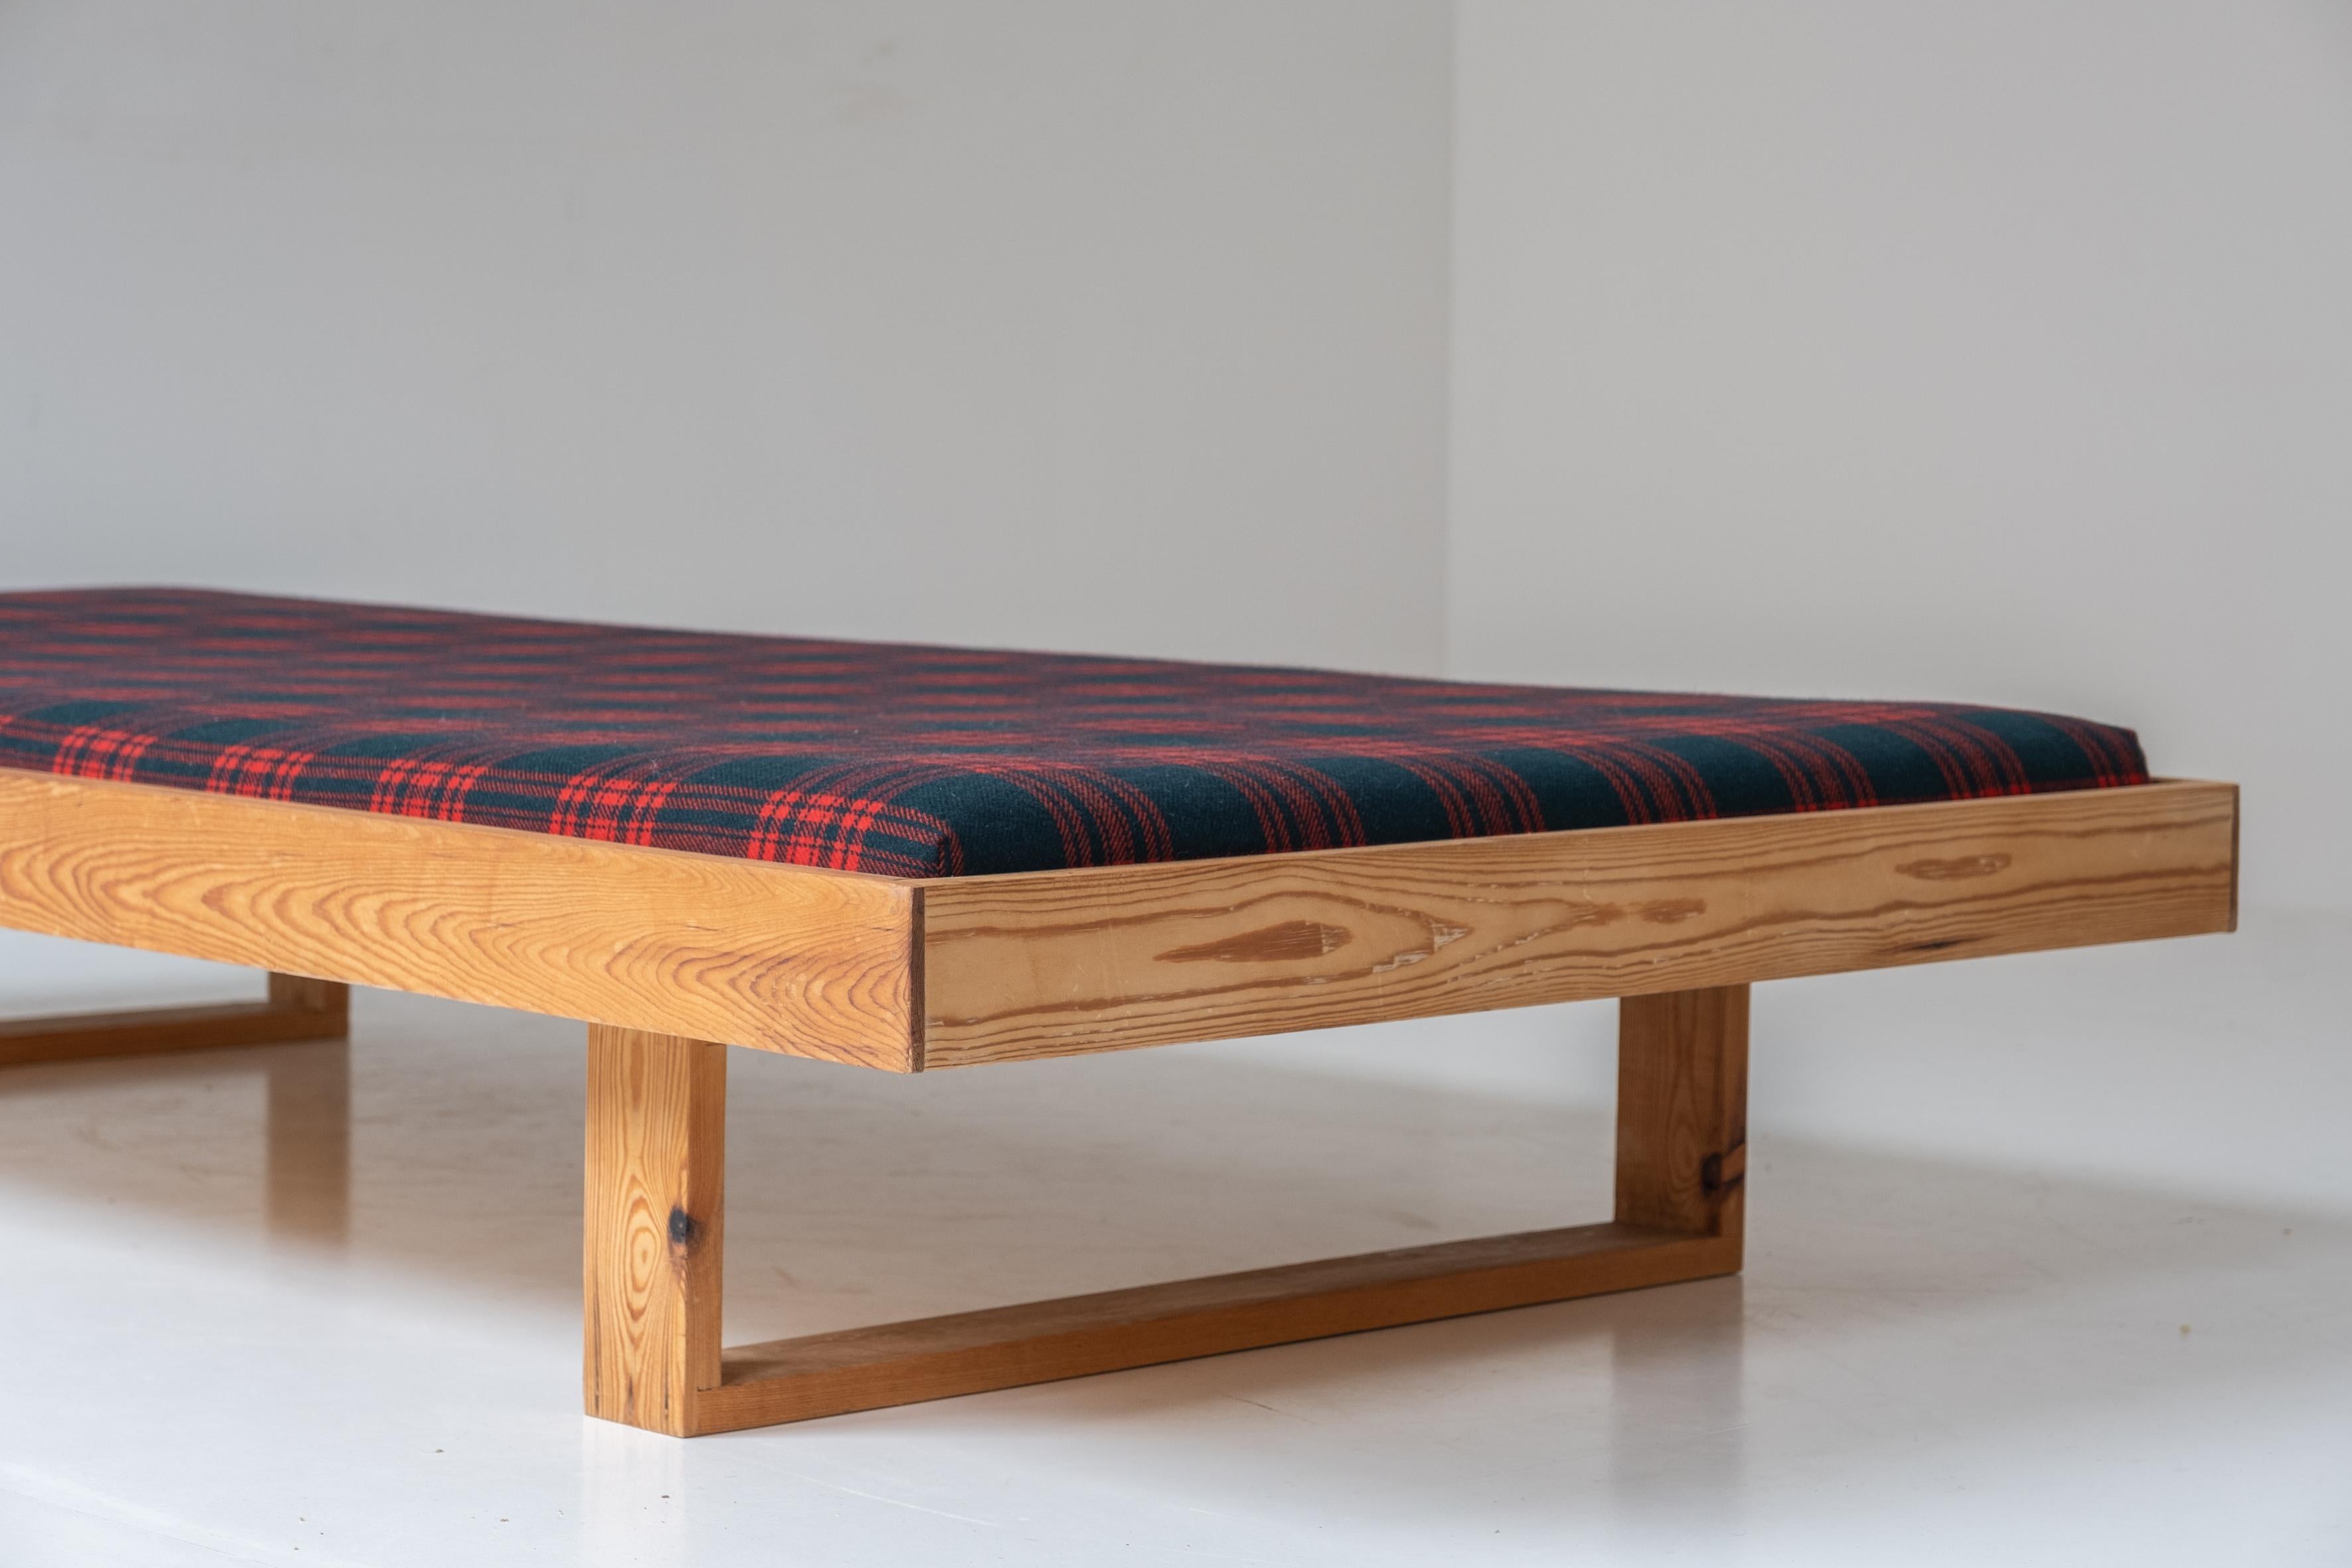 Fabric Daybed in pine from Denmark, dating from the 1960s.